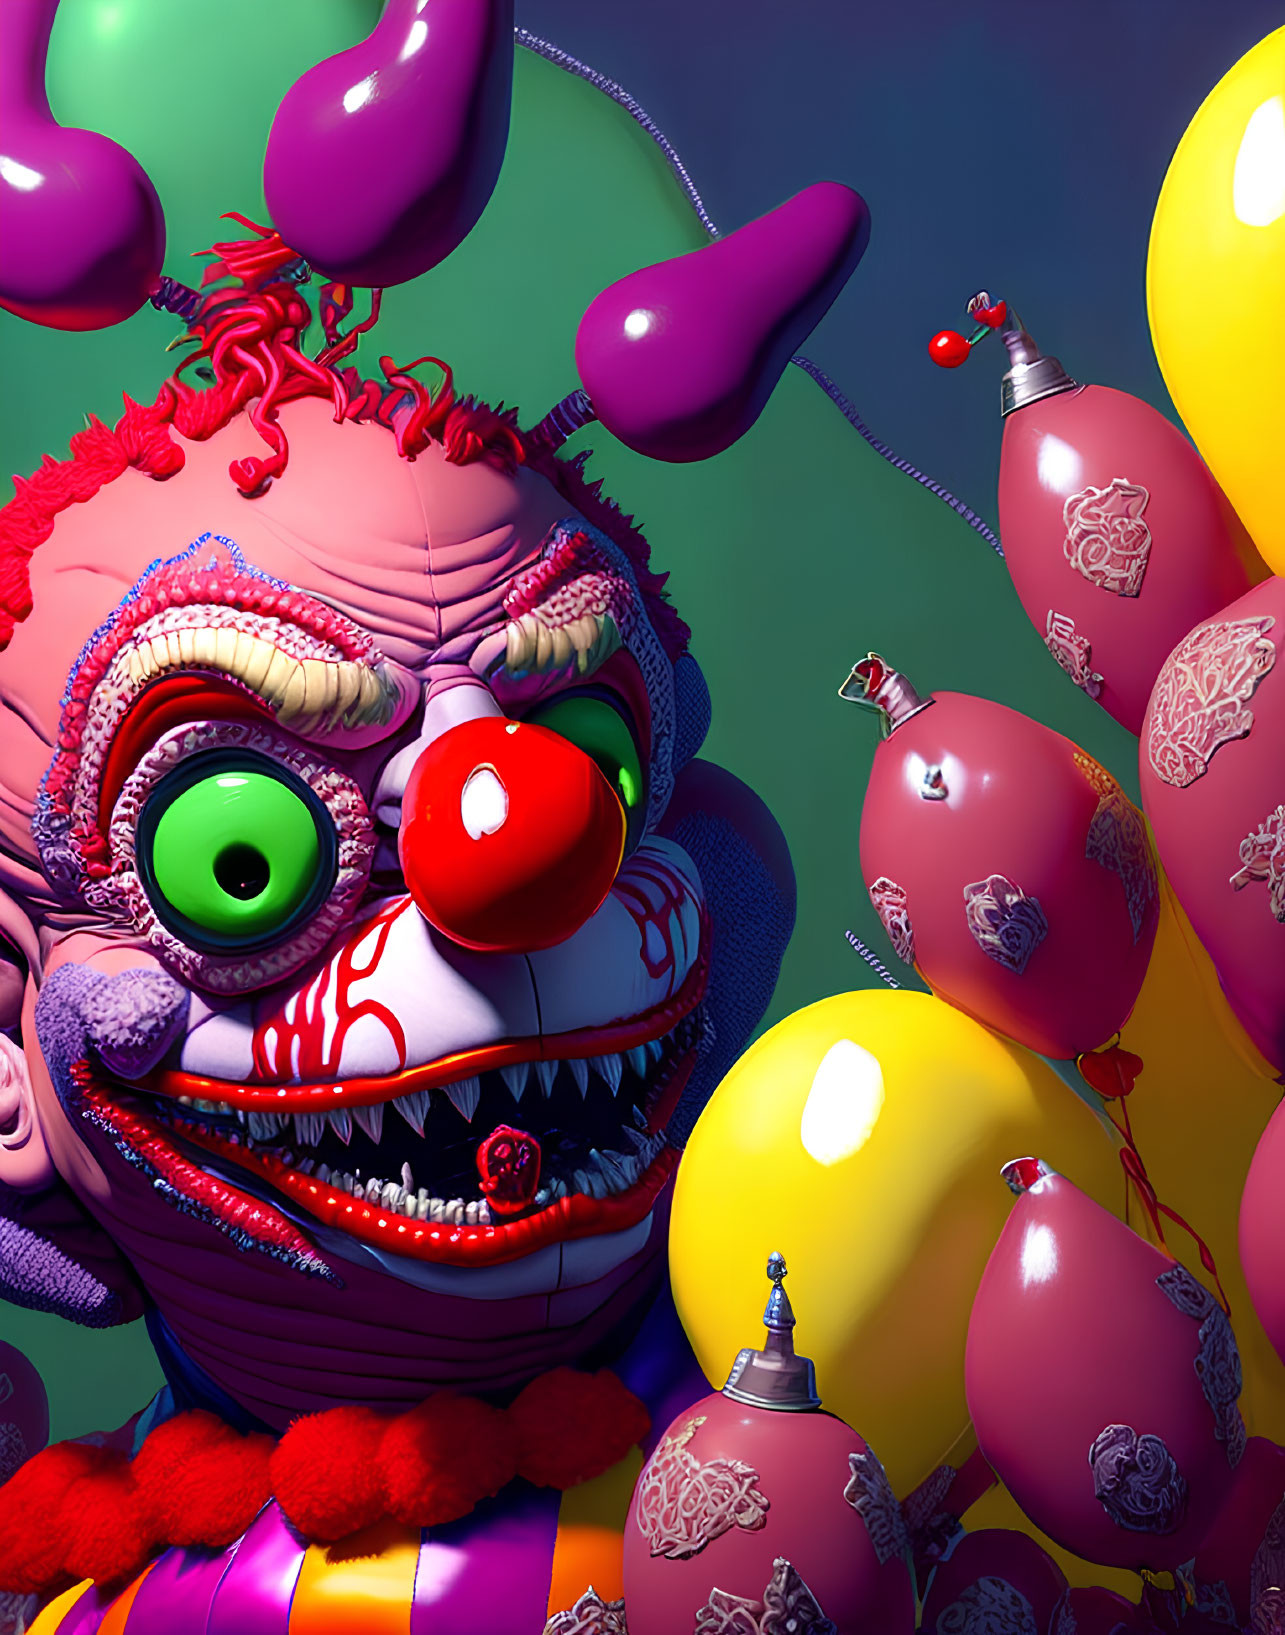 Colorful 3D Clown Image with Skull Pattern Balloons